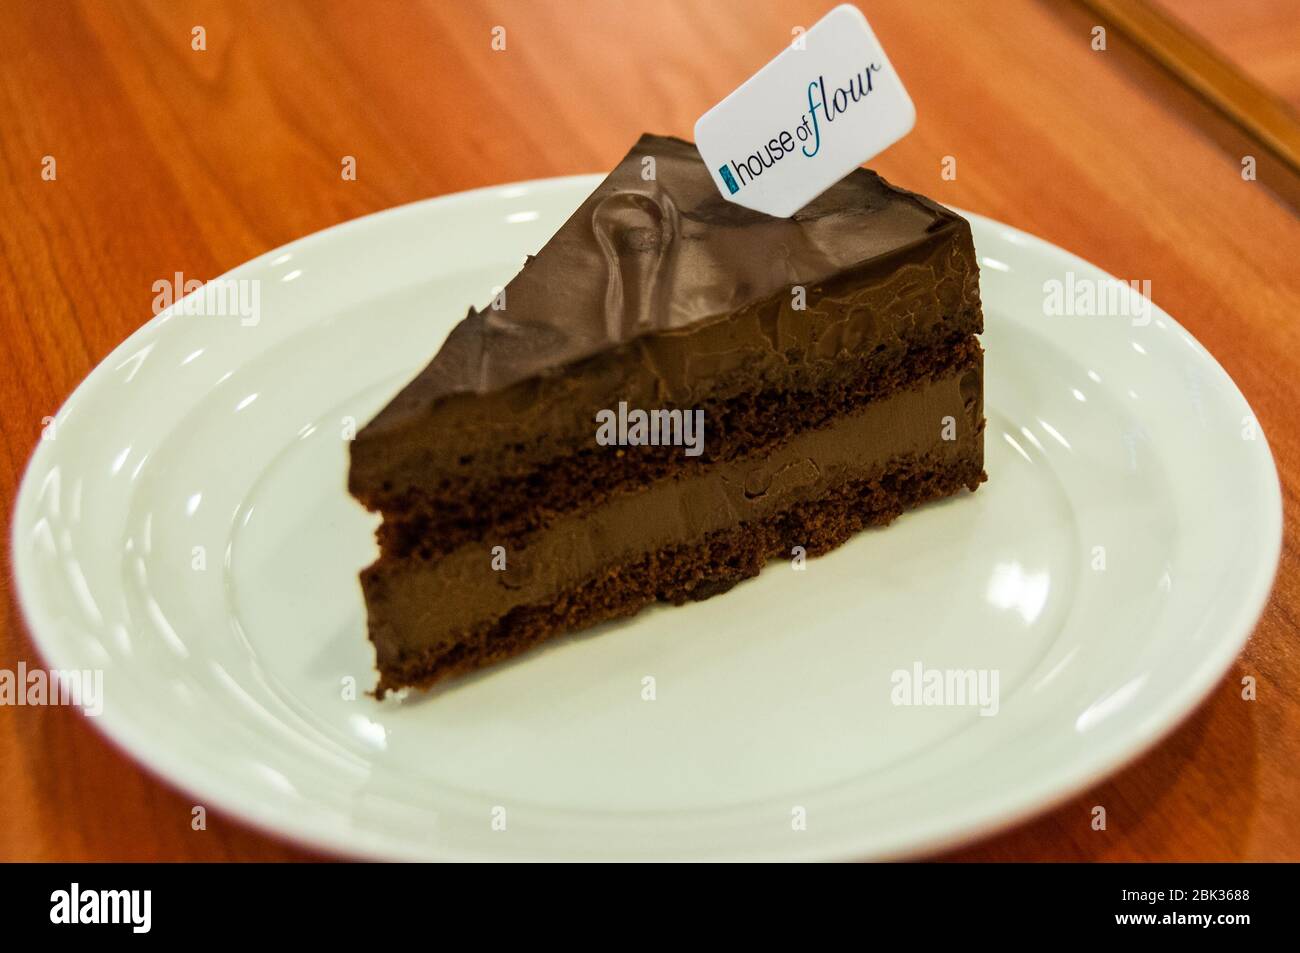 Hong Kong Plaza branch of House of Flour with their death by chocolate cake, Shanghai. Stock Photo